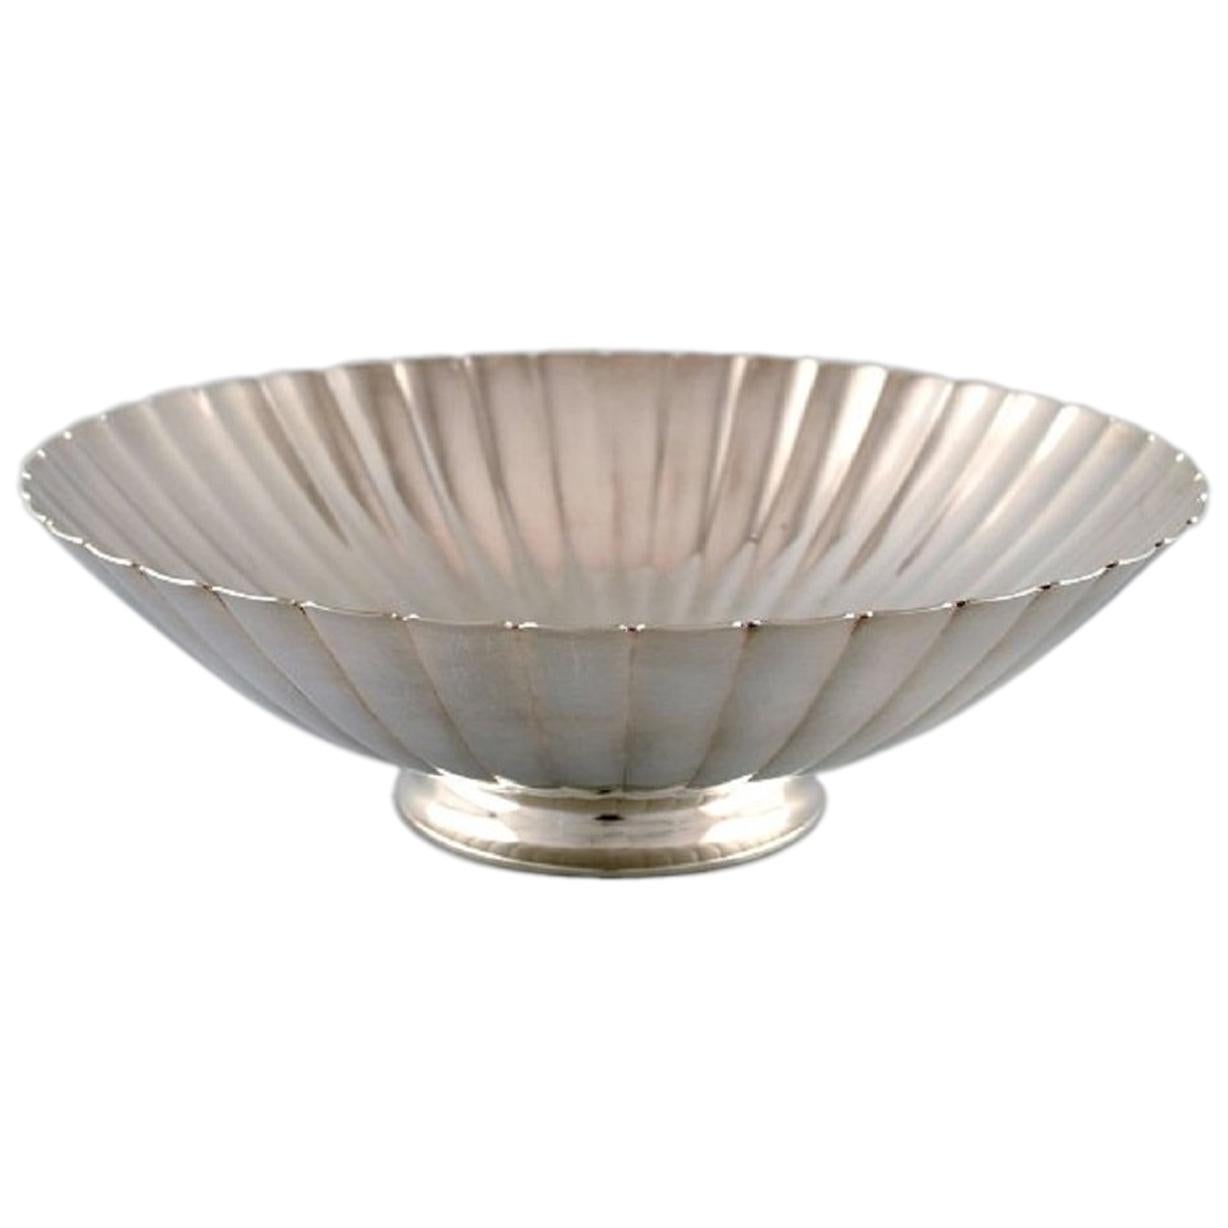 Georg Jensen Large Art Deco Sterling Silver Bowl in Fluted Style